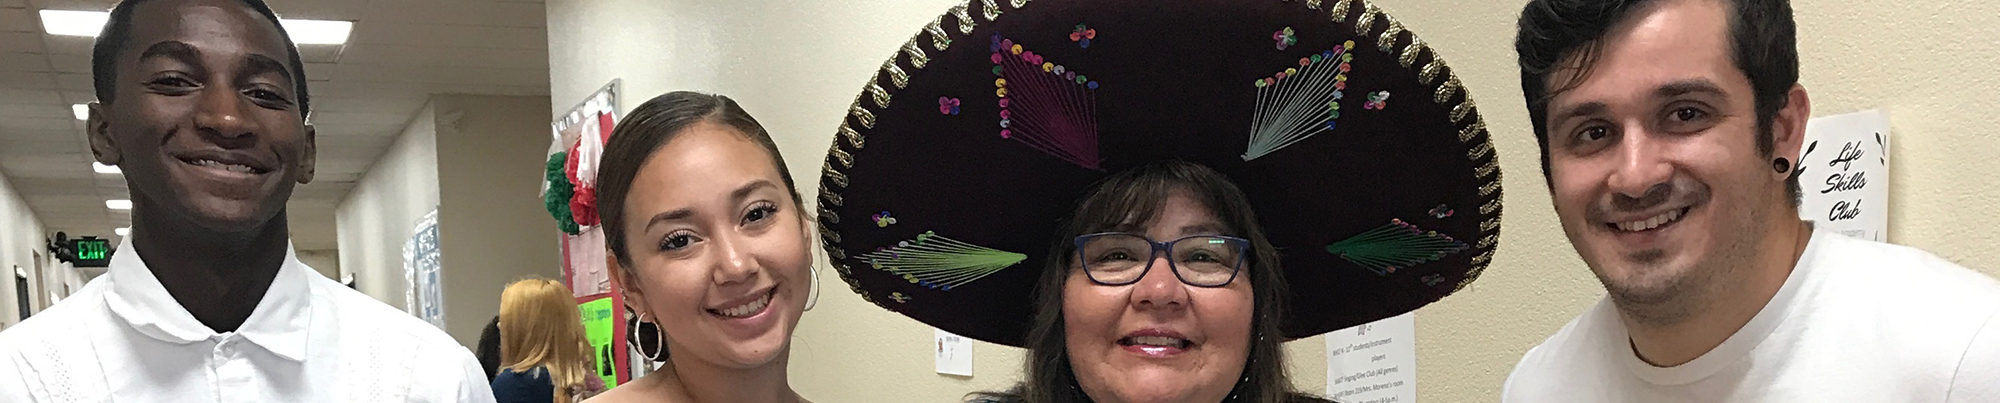 Four teachers smiling, one wearing a sombrero.